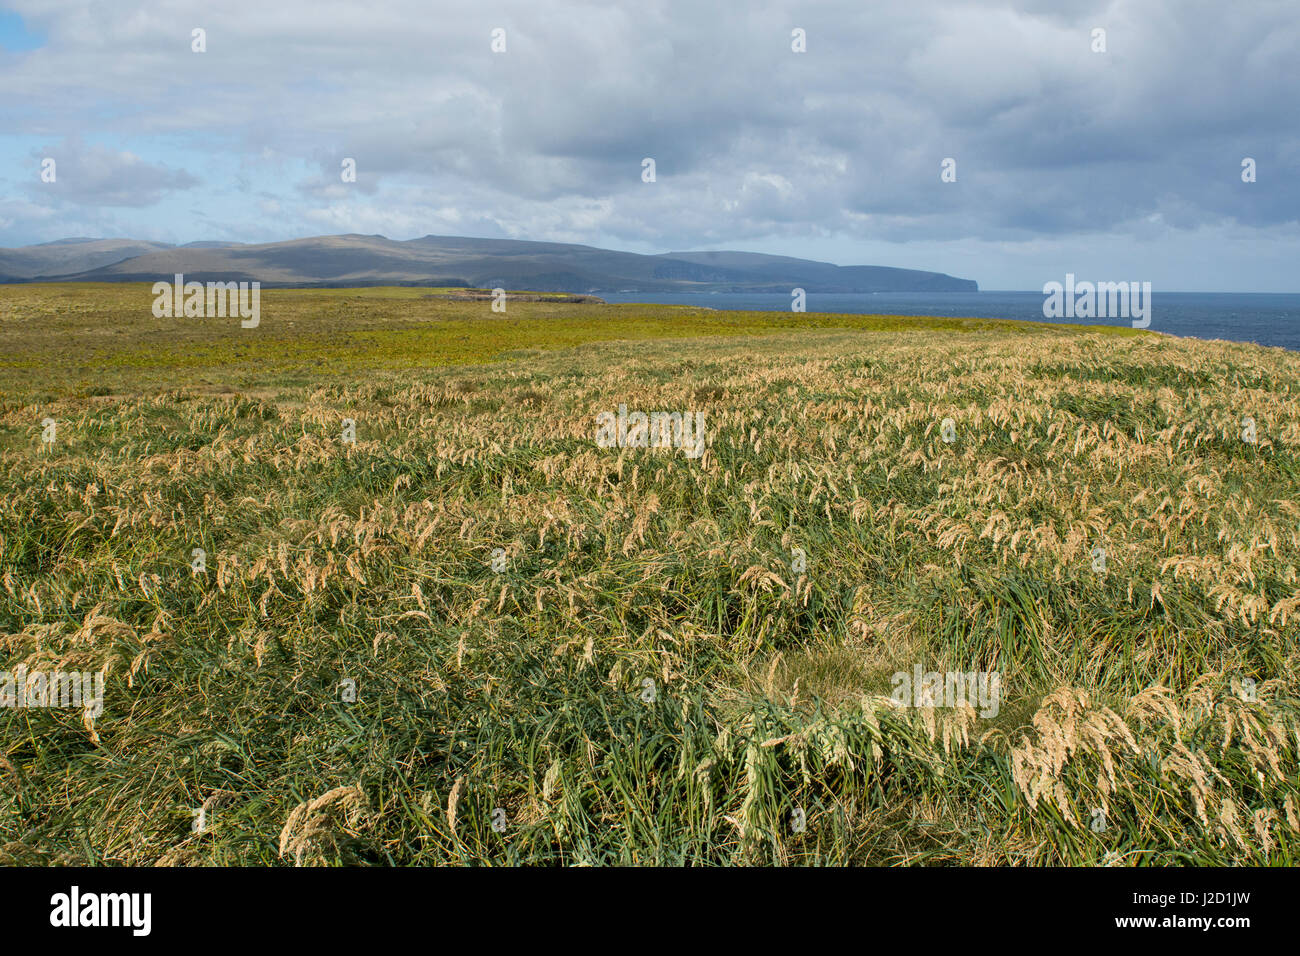 New Zealand, Auckland Islands, uninhabited archipelago in the south Pacific Ocean, Enderby Island. Tussac grass (Poa litorosa) aka tussok or tussock covered landscape. Stock Photo